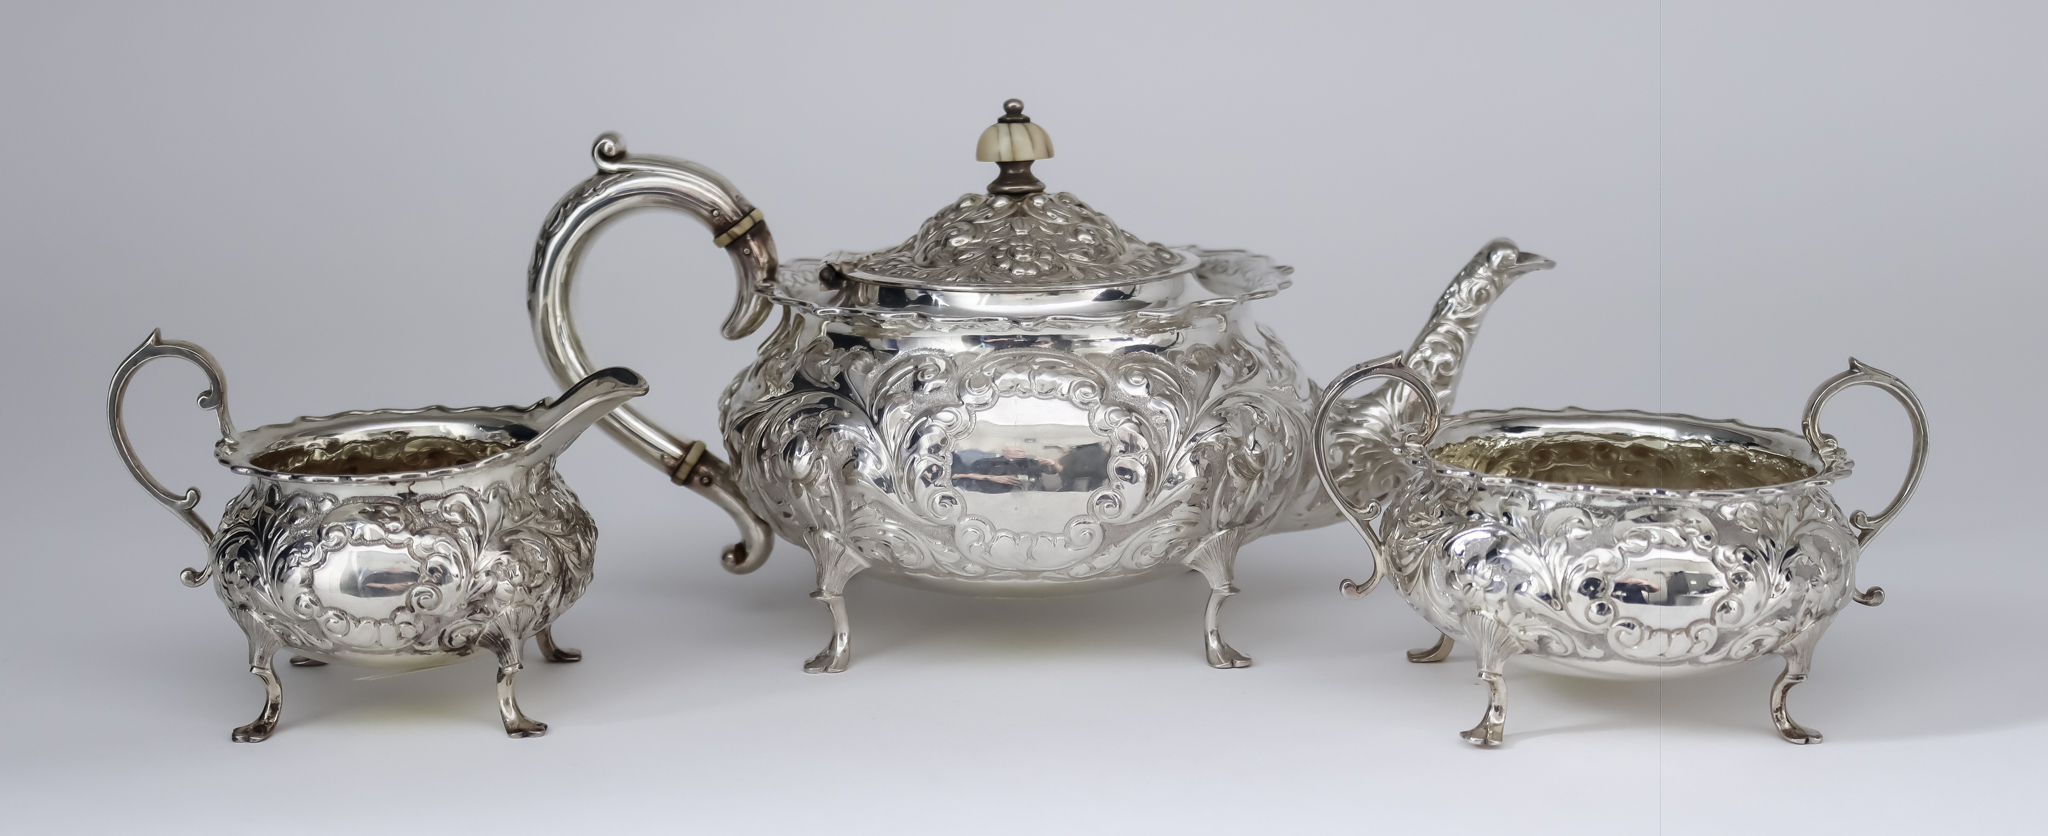 I* A Late Victorian Bachelors Silver Three Piece Tea Service, by Horace Woodward & Co Ltd., London